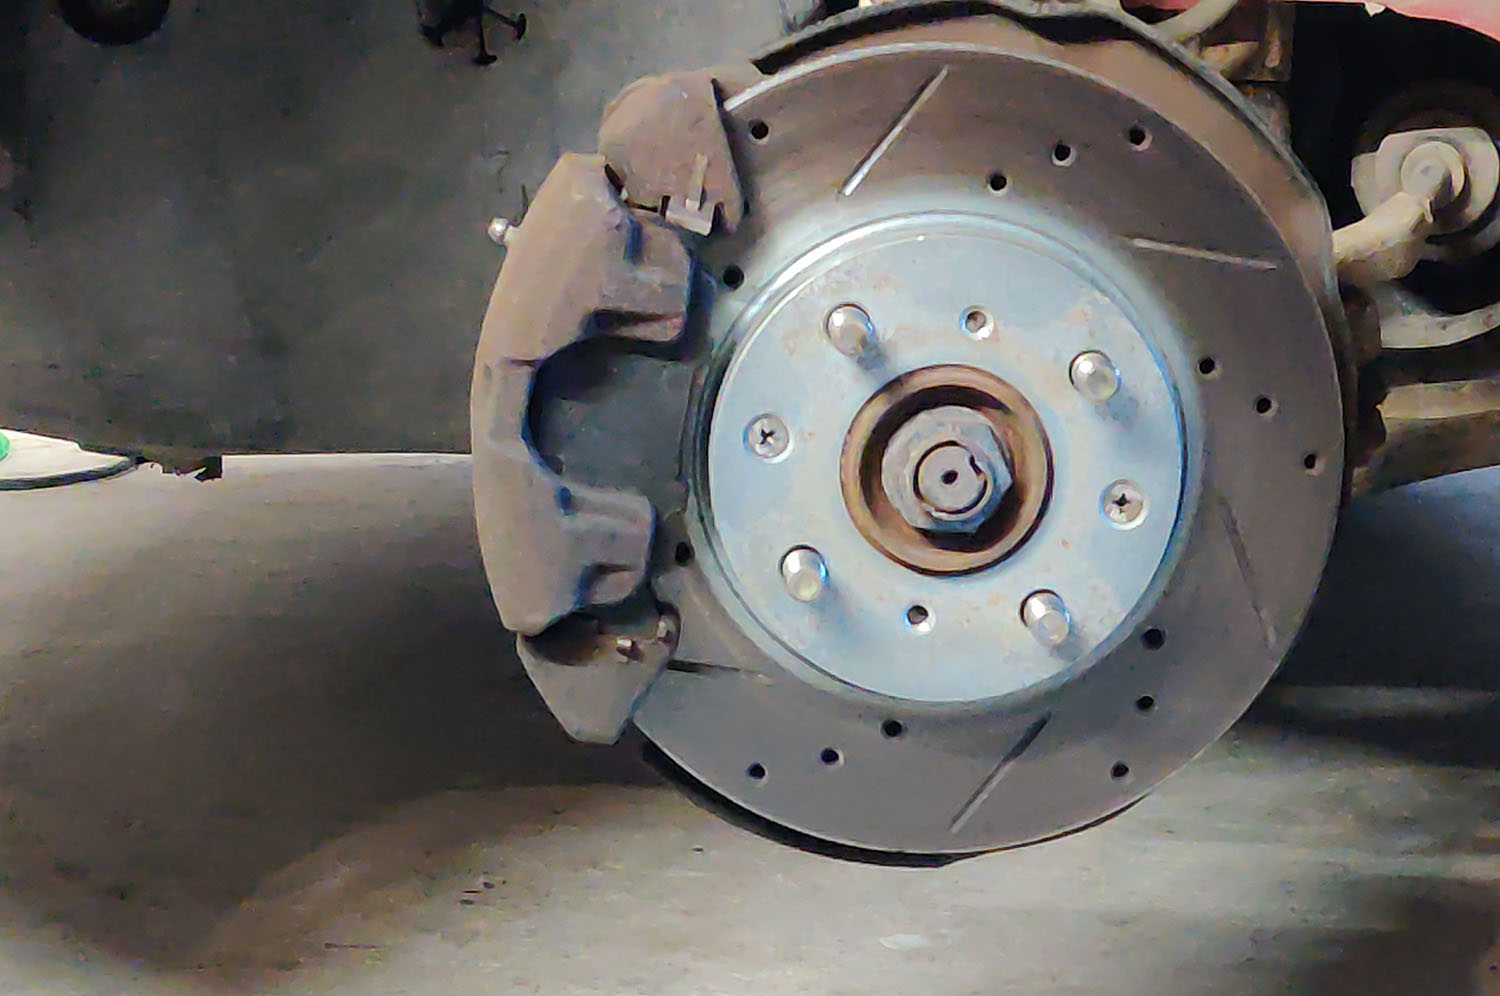 Brake rotor exposed without wheel and tire